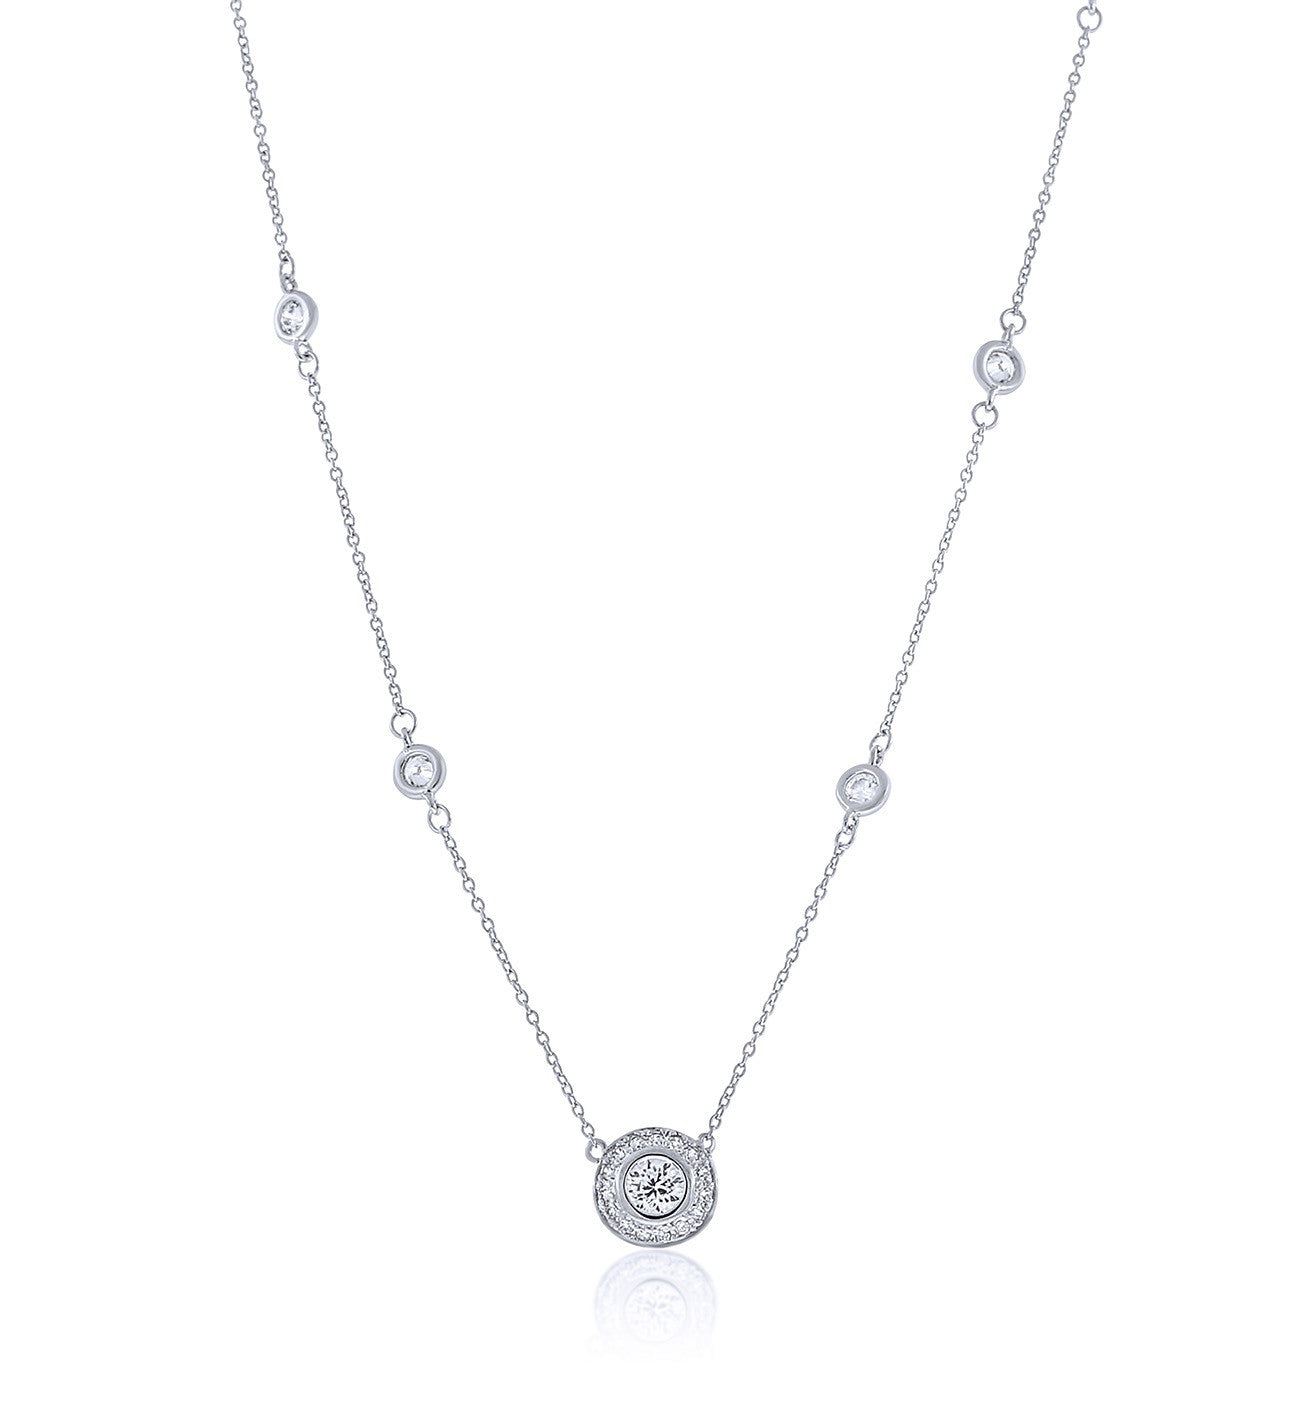 Chandi Diamond Pendant Necklance Adorned with Round Stones by the Yard by Bobby Schandra